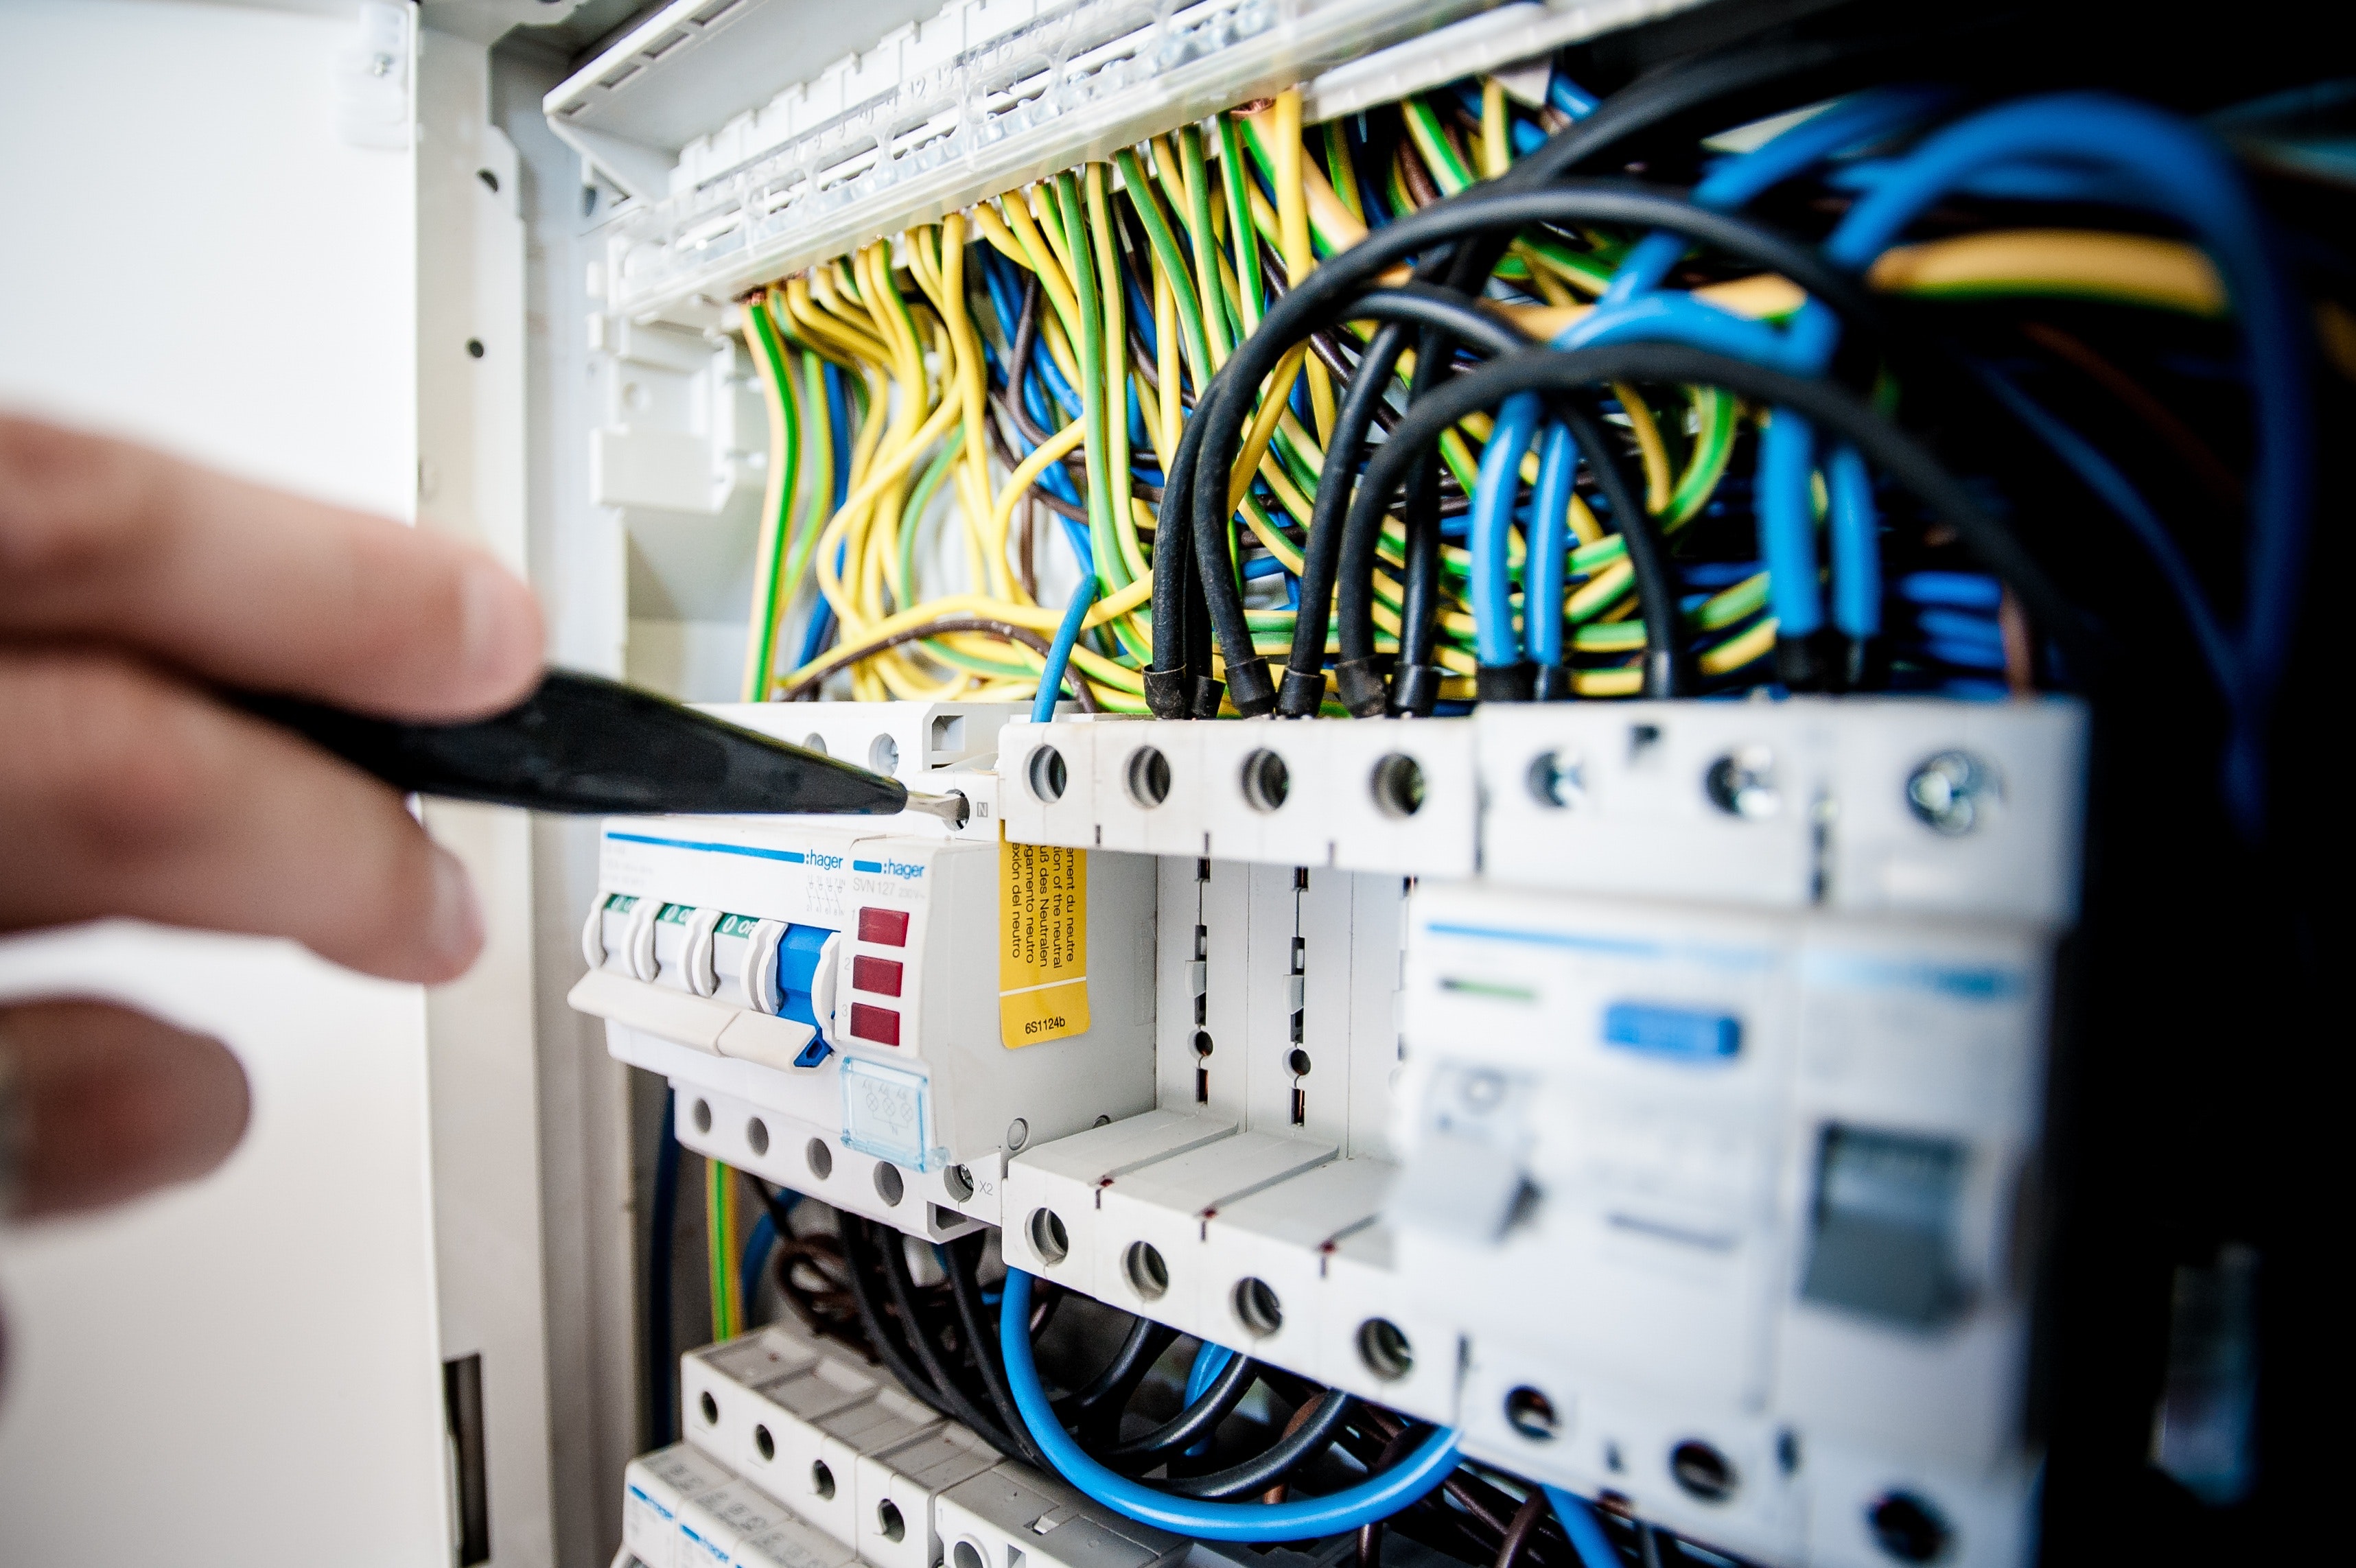 commercial electrical